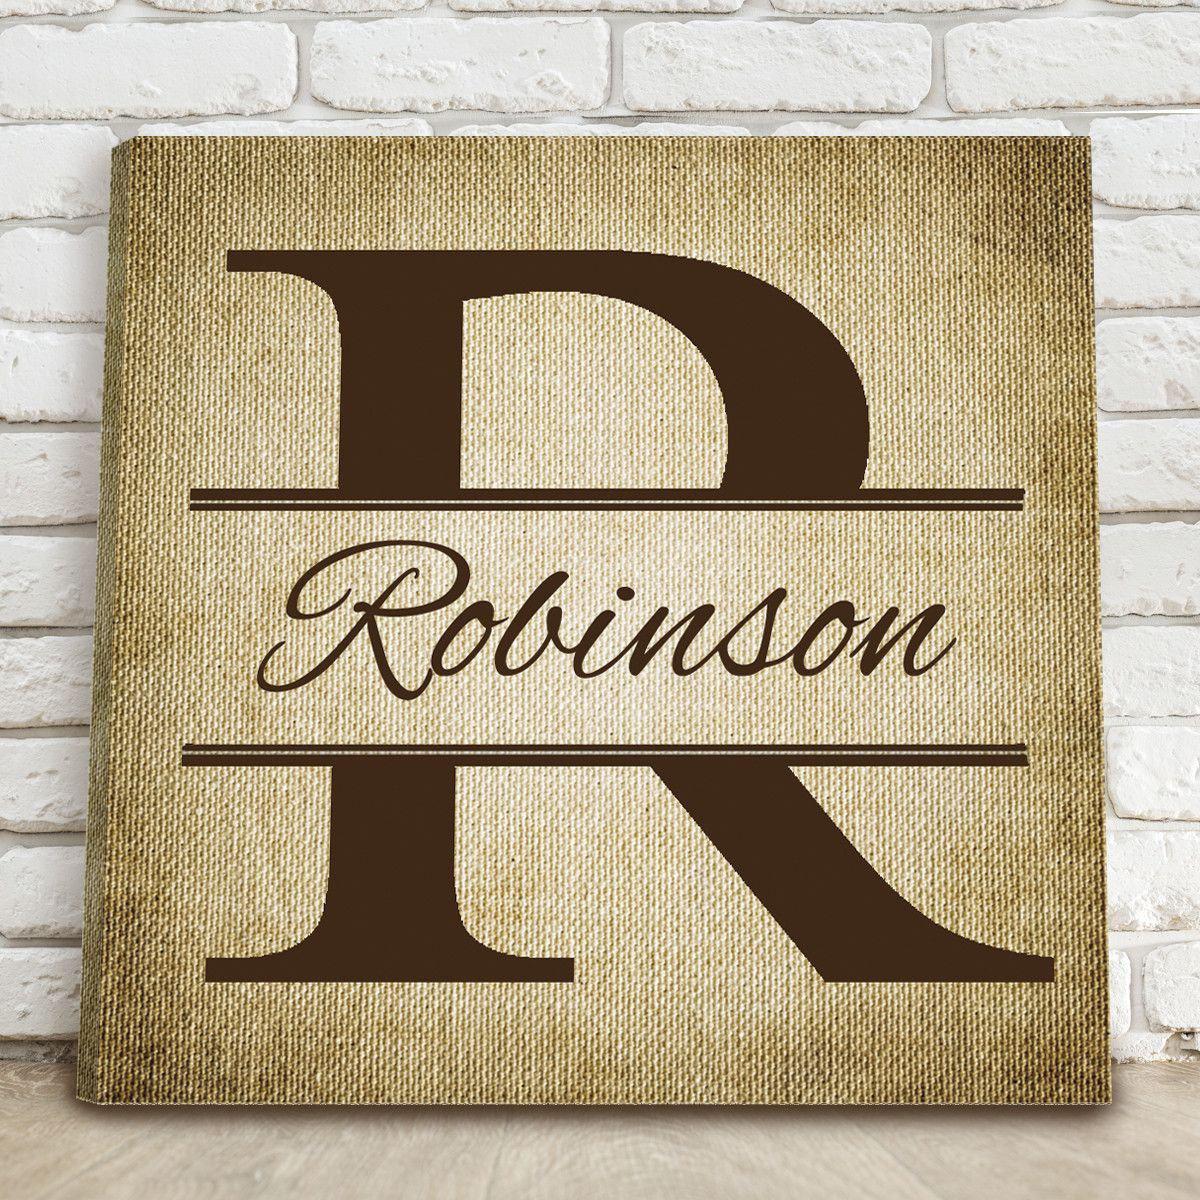 Personalized Stamped Design Canvas Print Sign